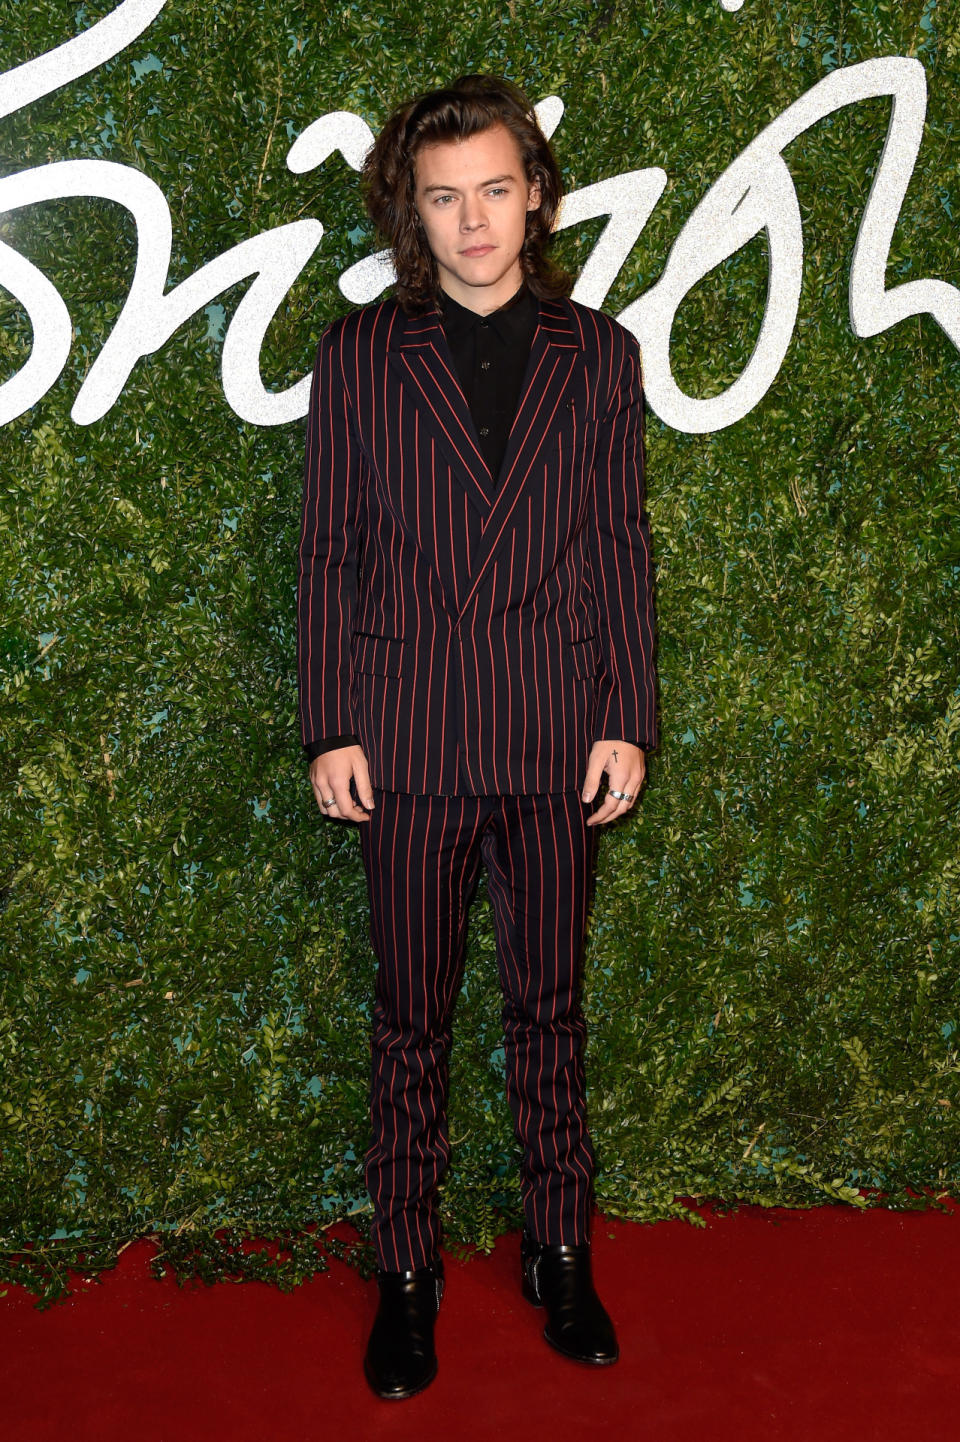 One Direction member Harry Styles, whose unique sense of style embodies British fashion for the boys, presented Emma Watson with the British Style Award. The singer wore a red-striped Lanvin suit.